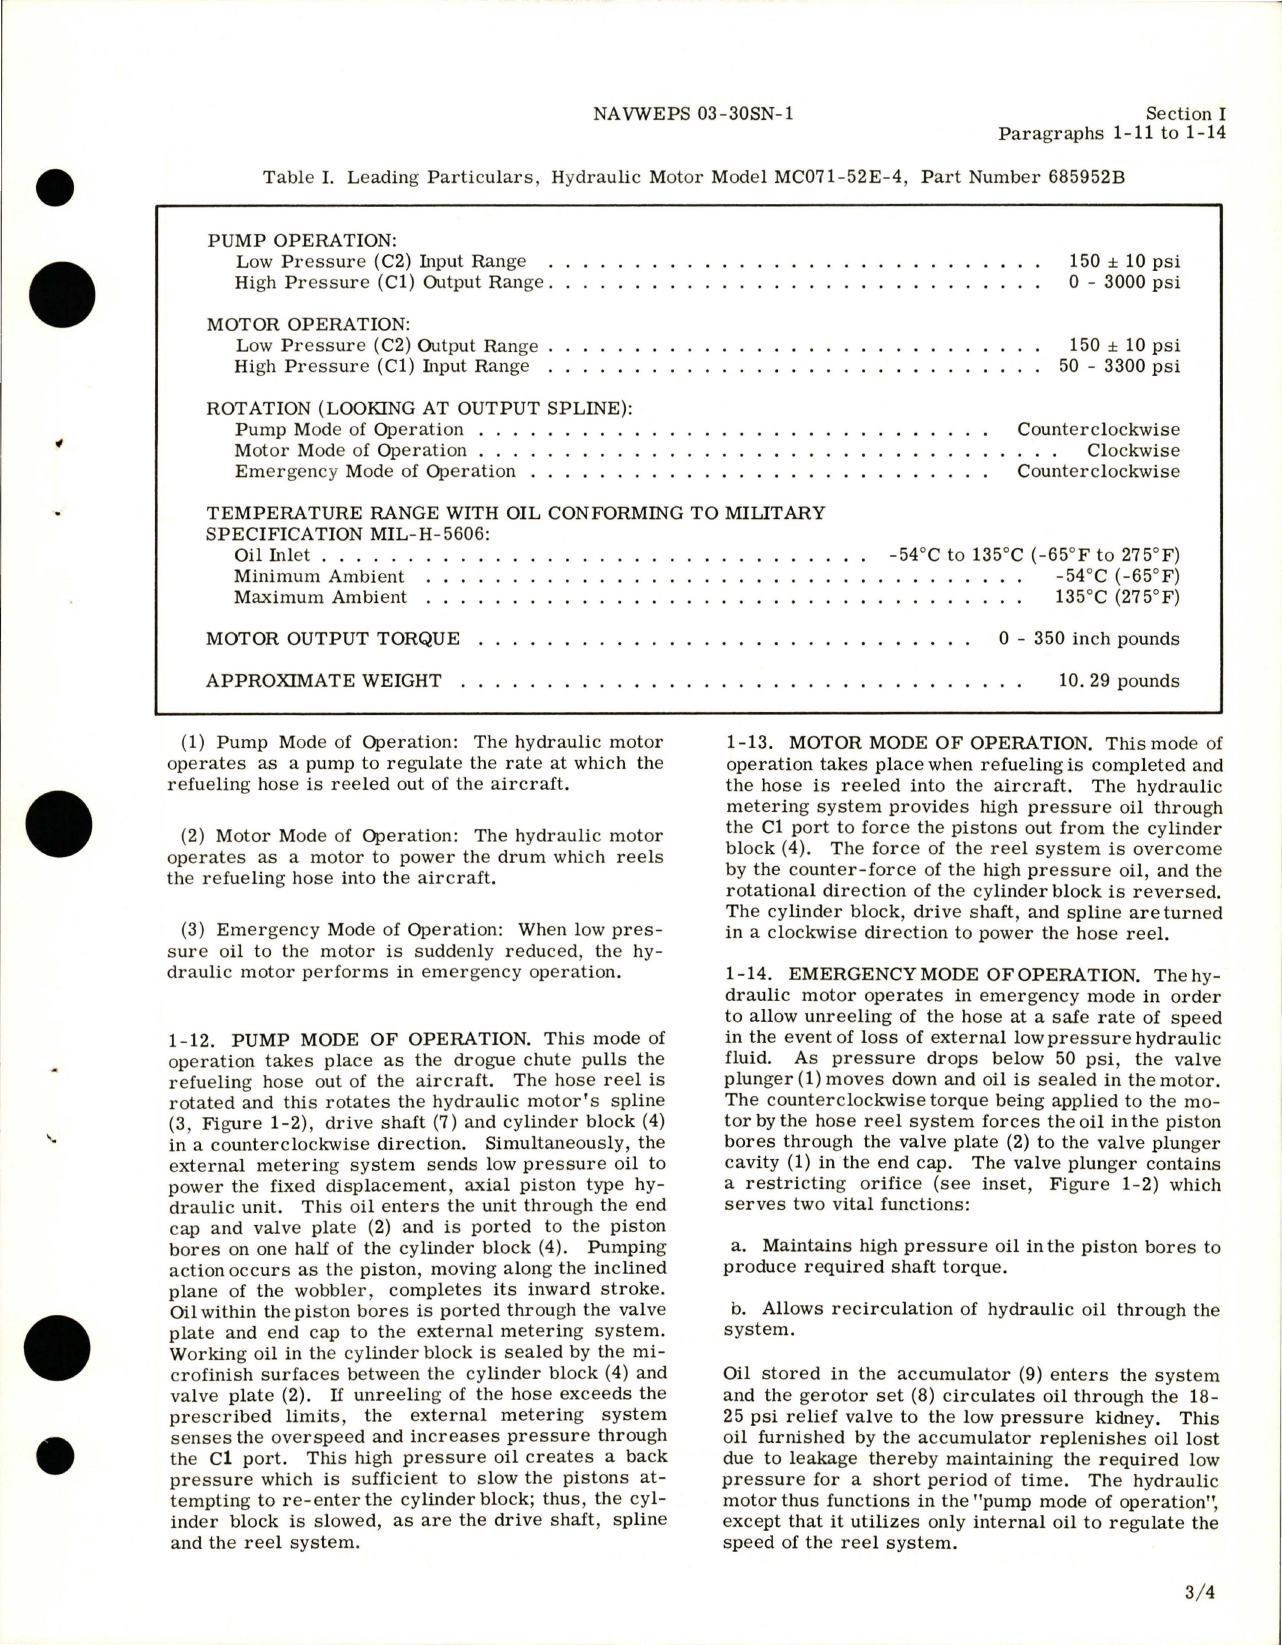 Sample page 7 from AirCorps Library document: Overhaul Instructions for Hydraulic Motor - Parts 684314, 685952, 685952A, and 685952B